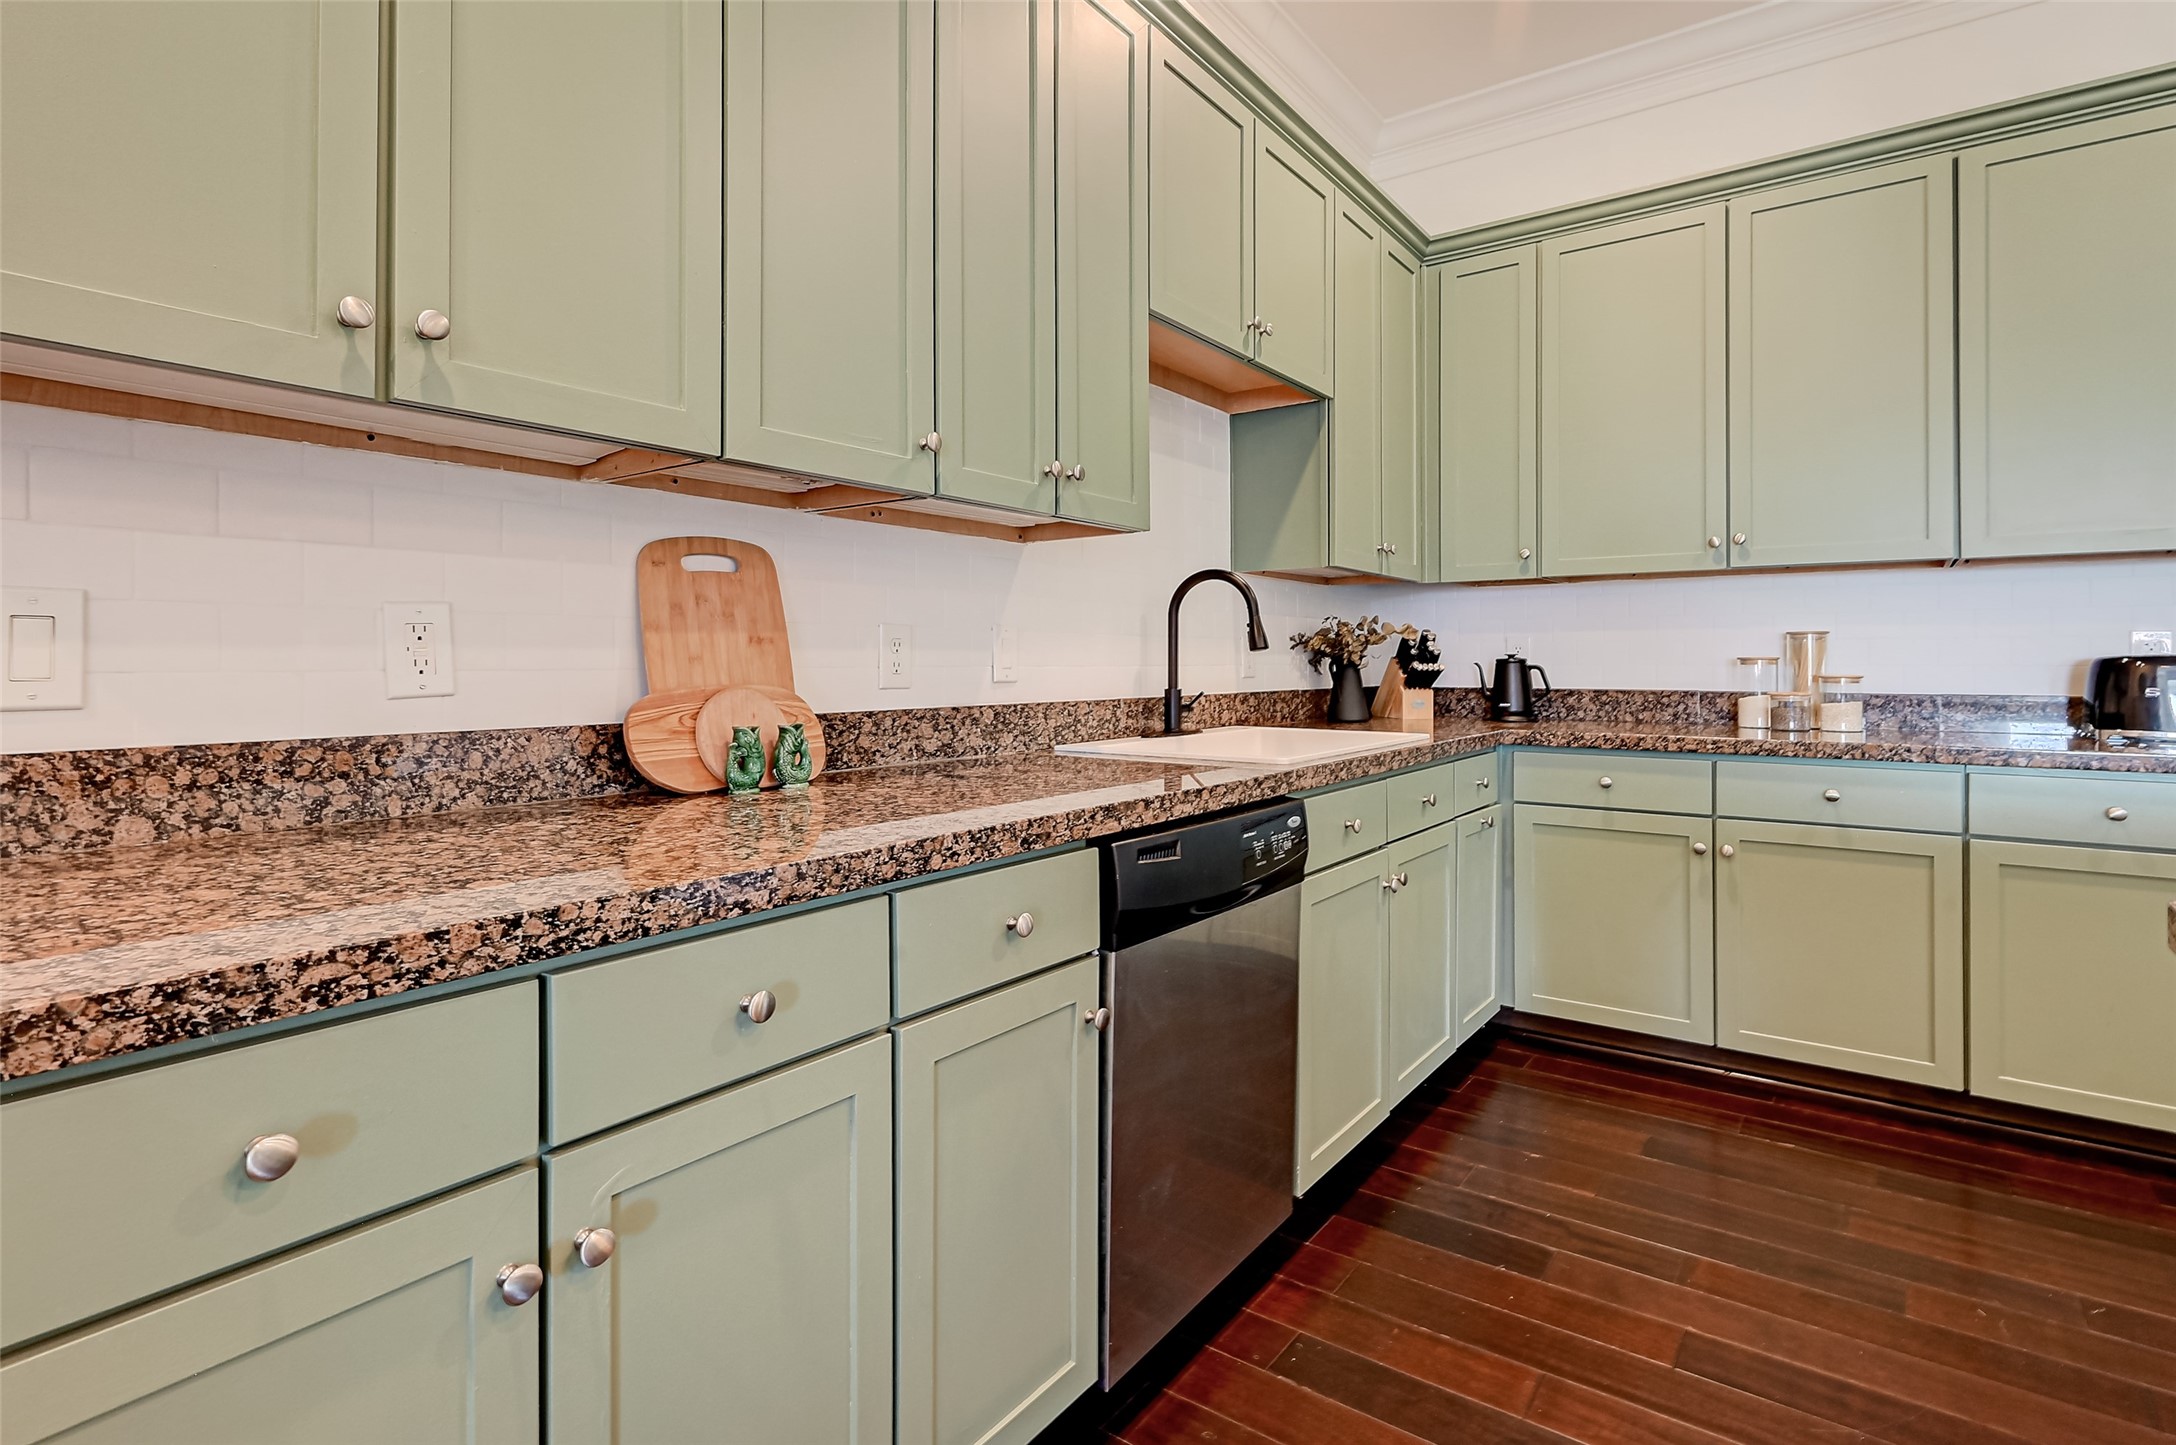 Painted shaker-style cabinets, granite countertops & stainless steel appliances.